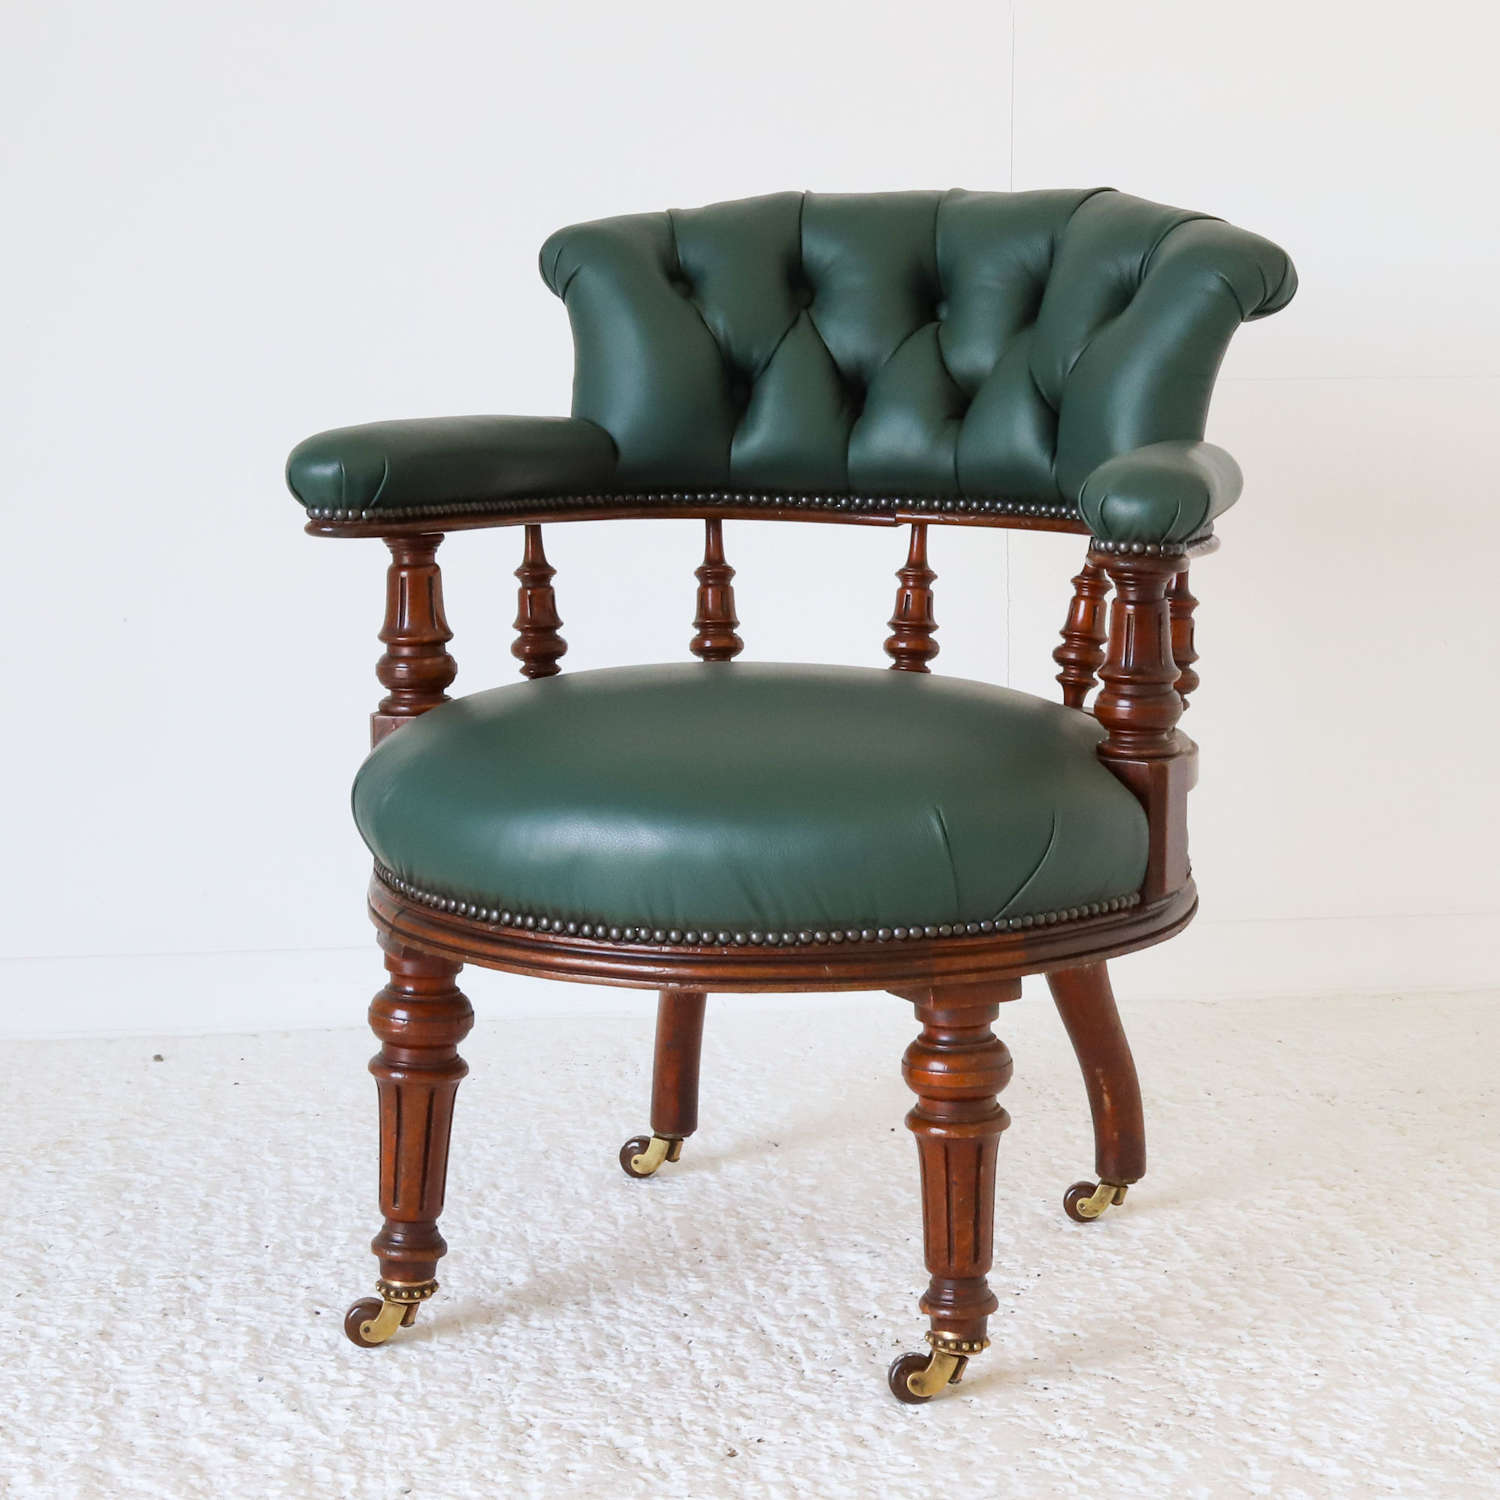 Late Victorian Captain's Chair in the manner of Gillows